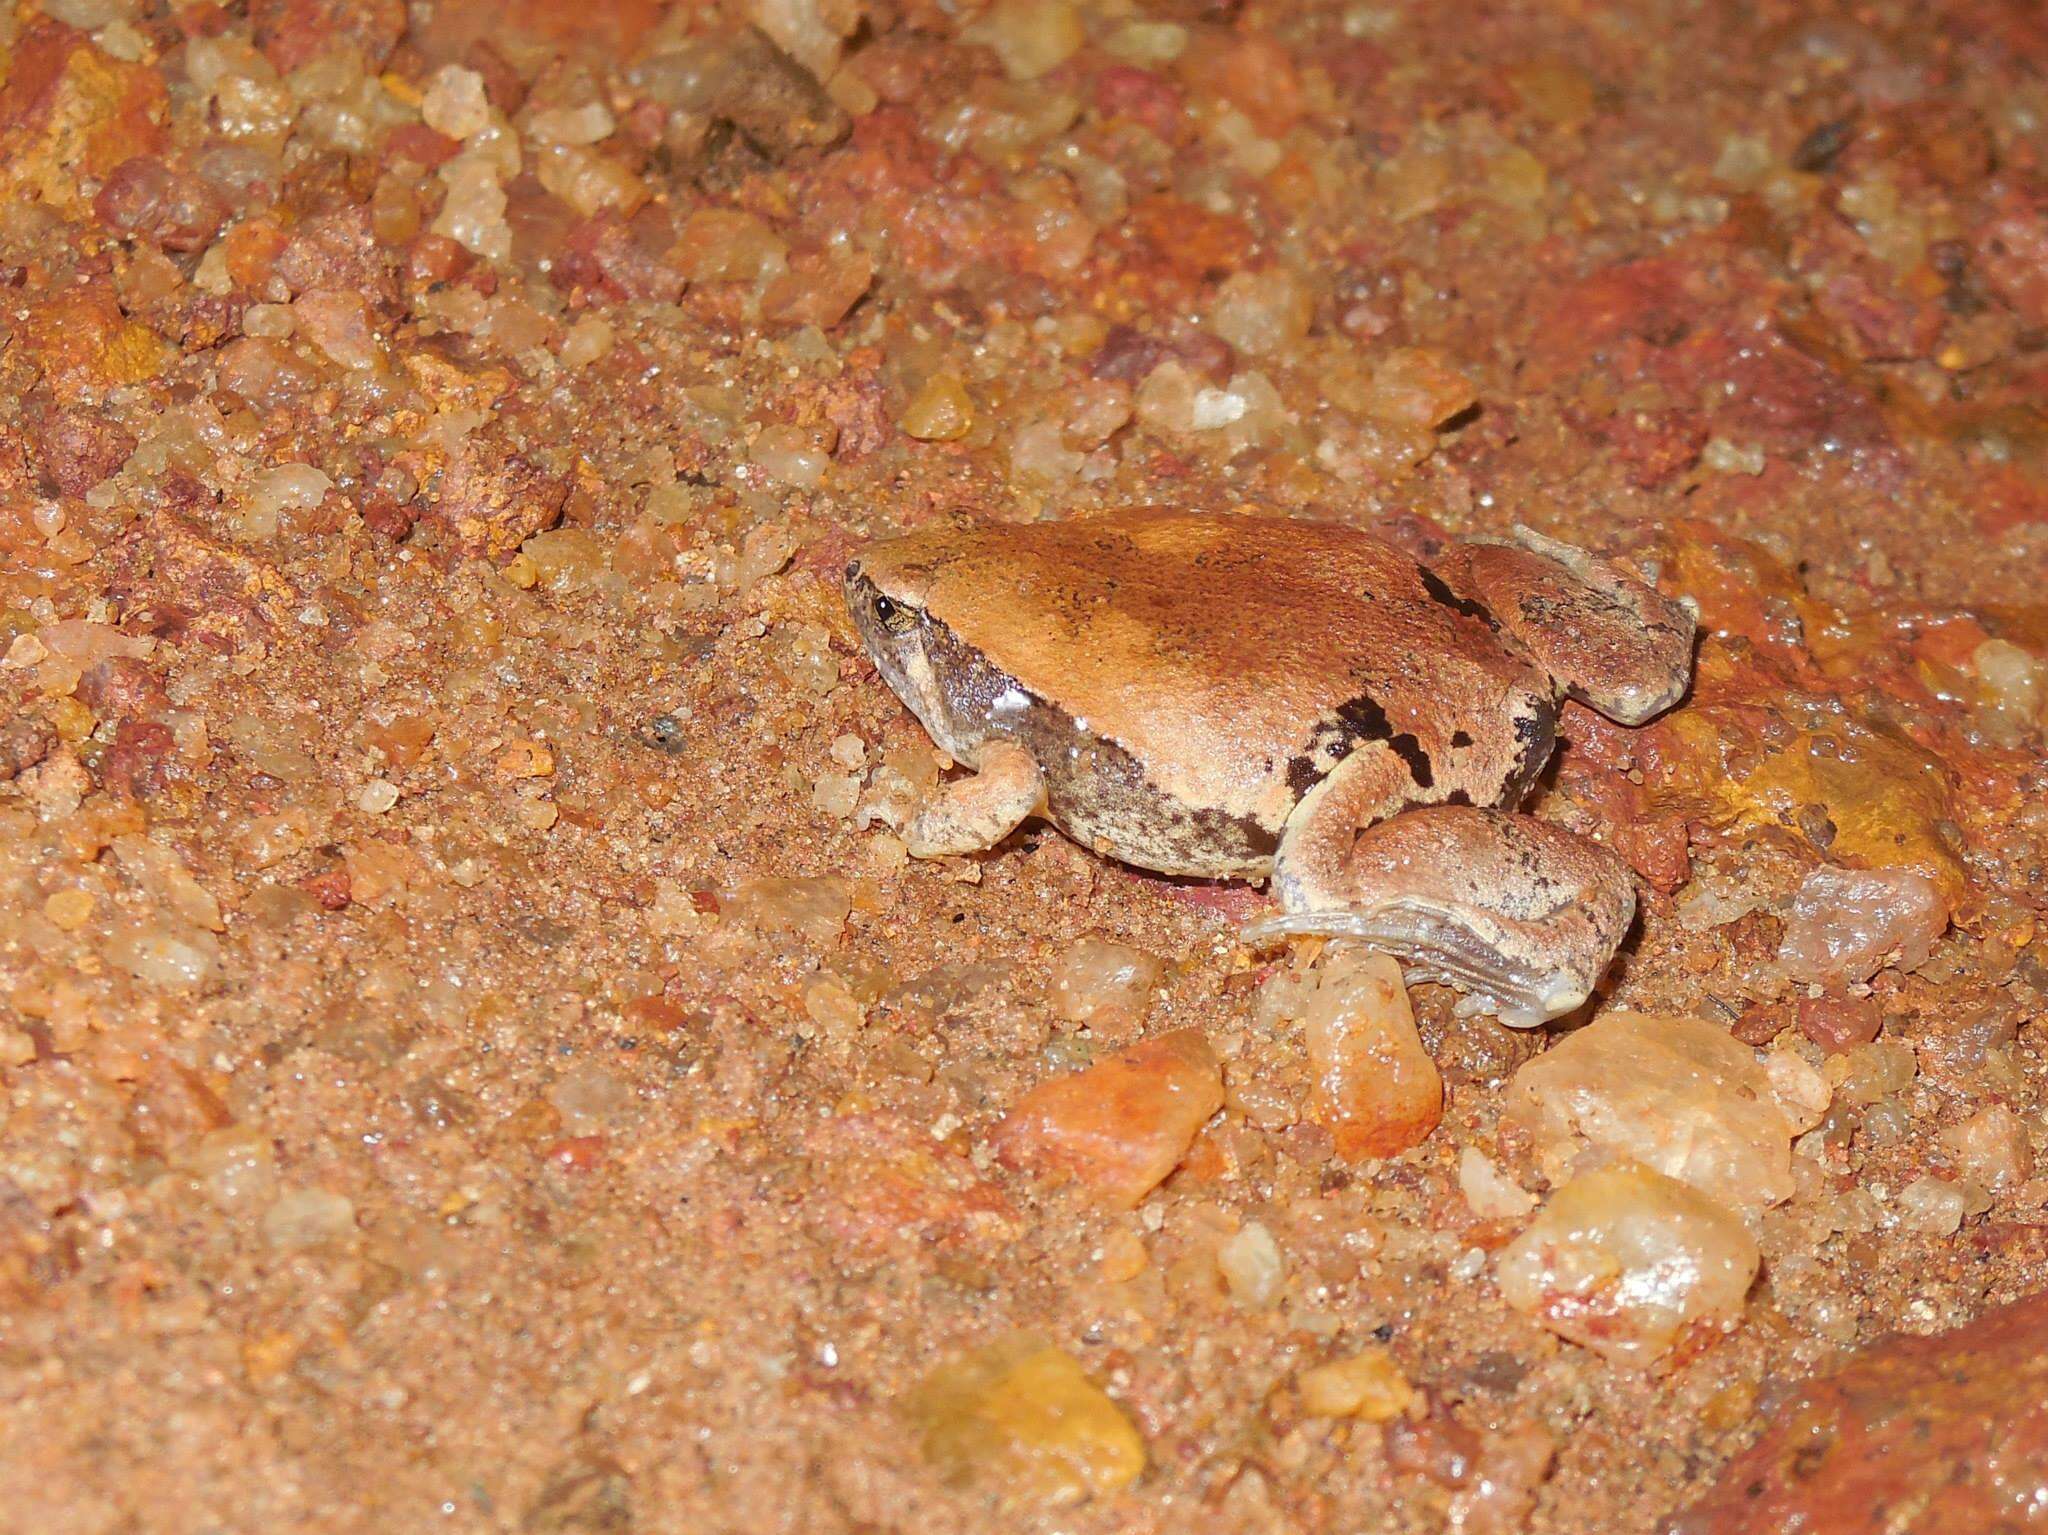 Image of Jerdon’s narrow-mouthed frog